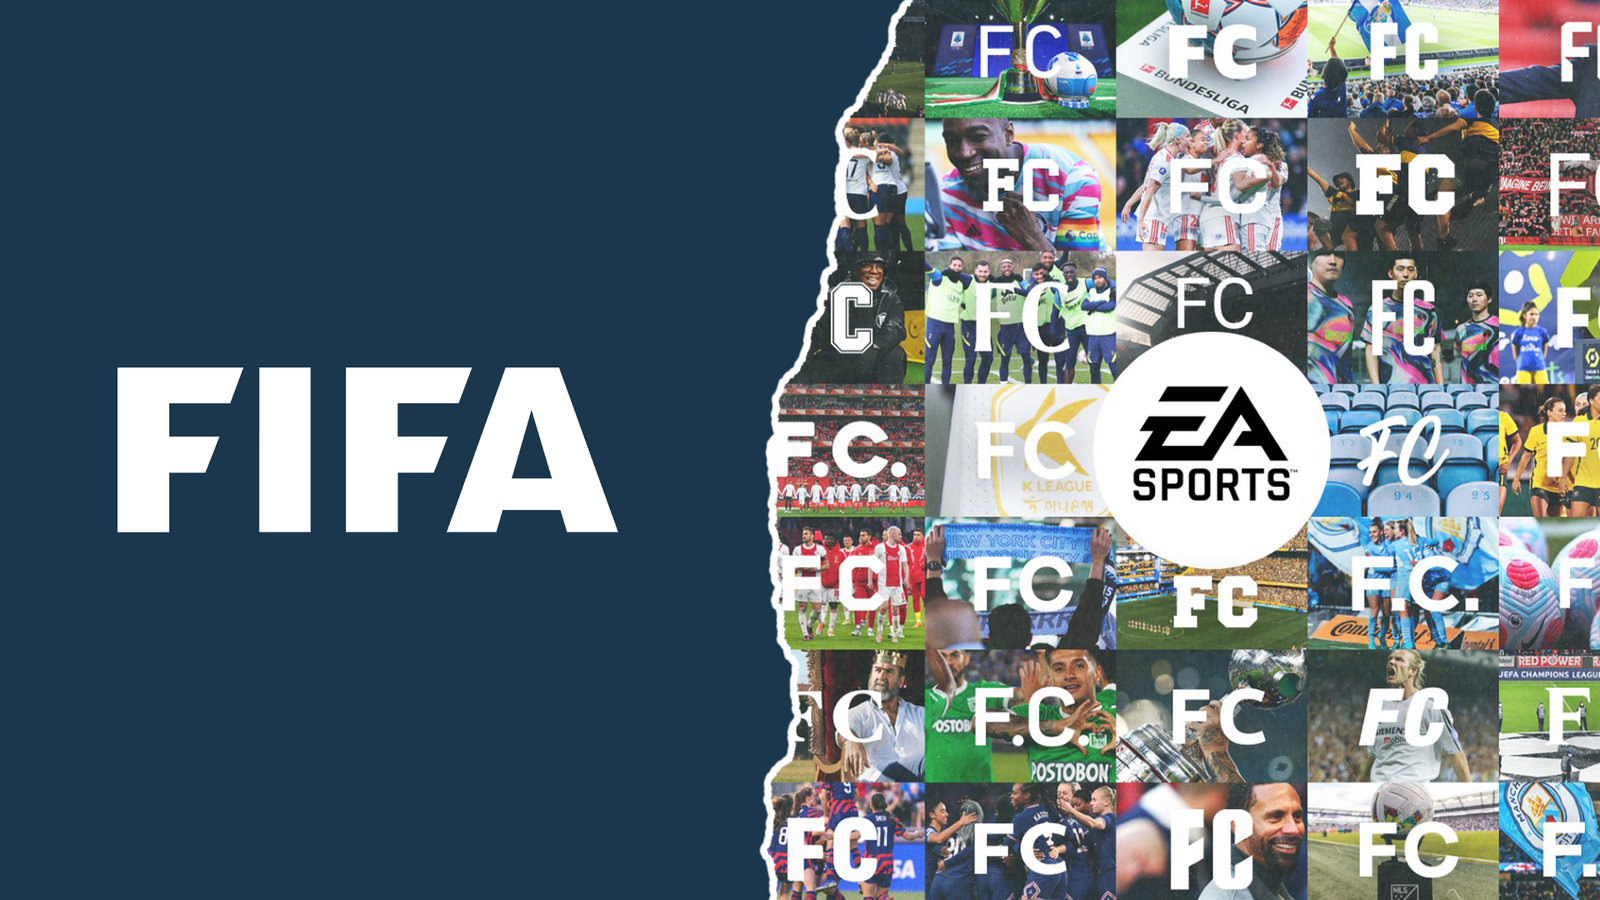 NEW ERA - The EA Sports FIFA franchise is coming to an end